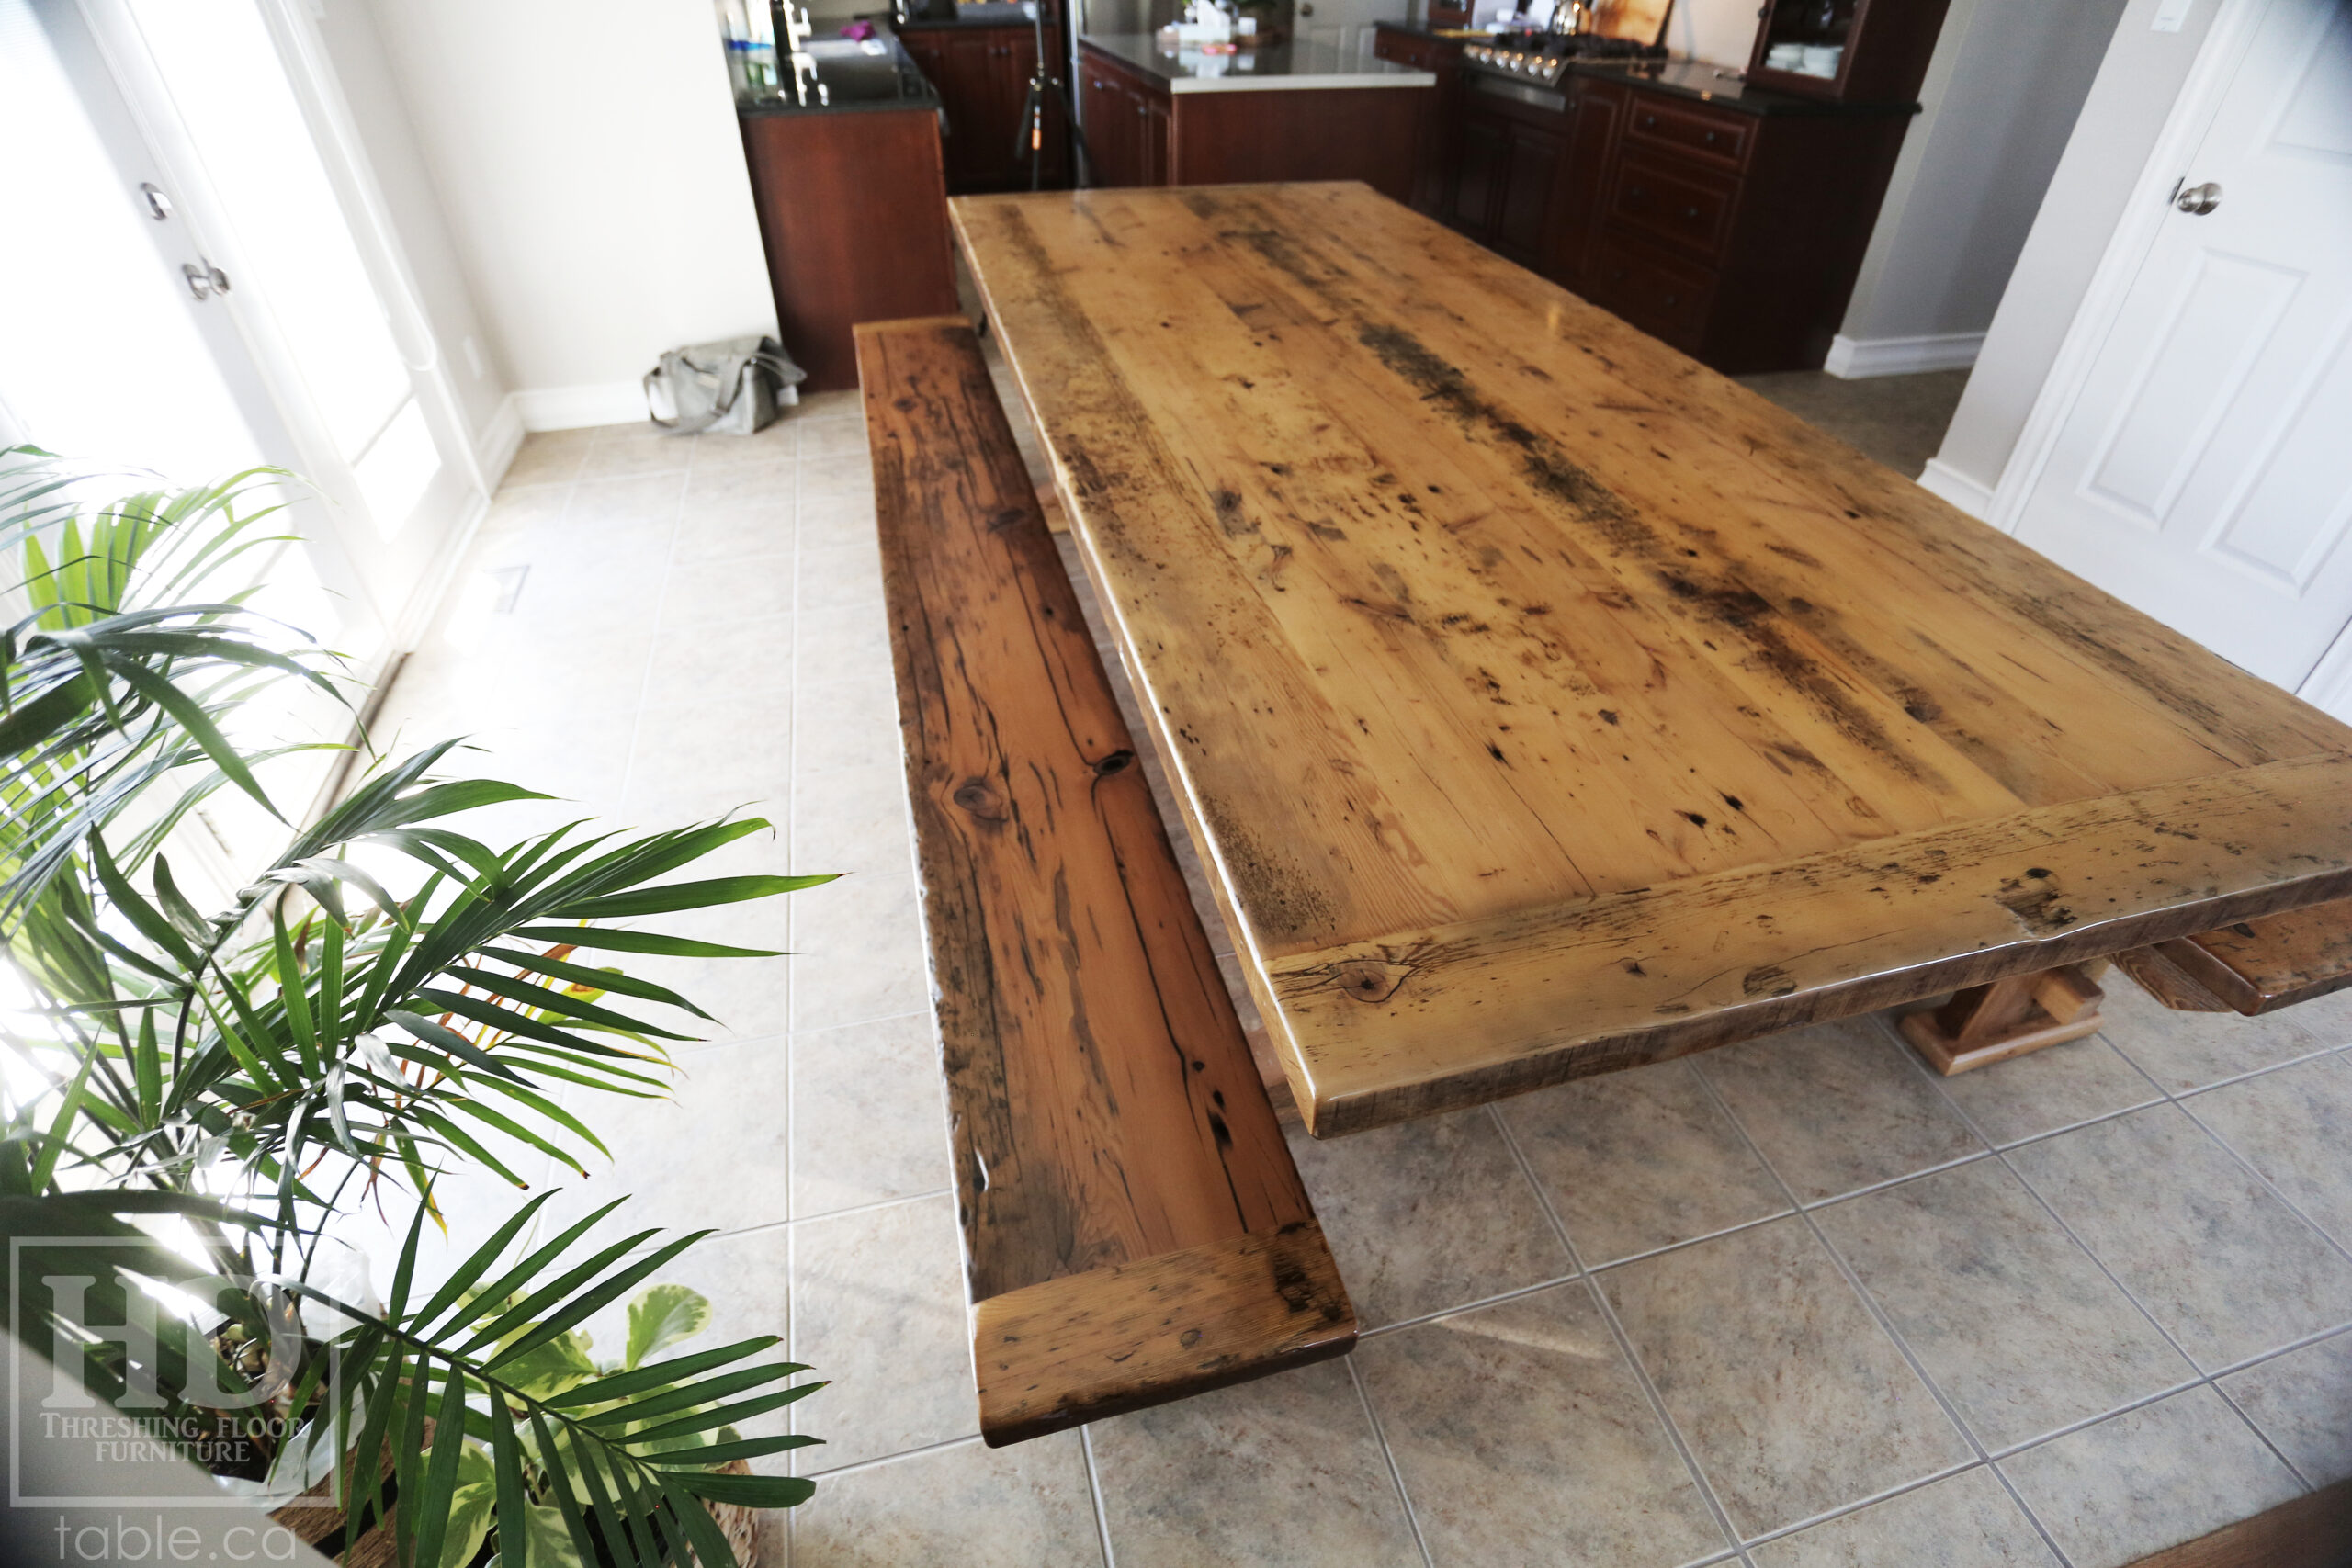 10’ Ontario Barnwood Table we made for a Norwich, Ontario Home – 48” wide – Trestle Base - Old Growth Reclaimed Hemlock Threshing Floor Construction – Original edges & distressing maintained – Greytone Option - Premium epoxy + satin polyurethane finish – [Two] Matching Trestle Benches - www.table.ca